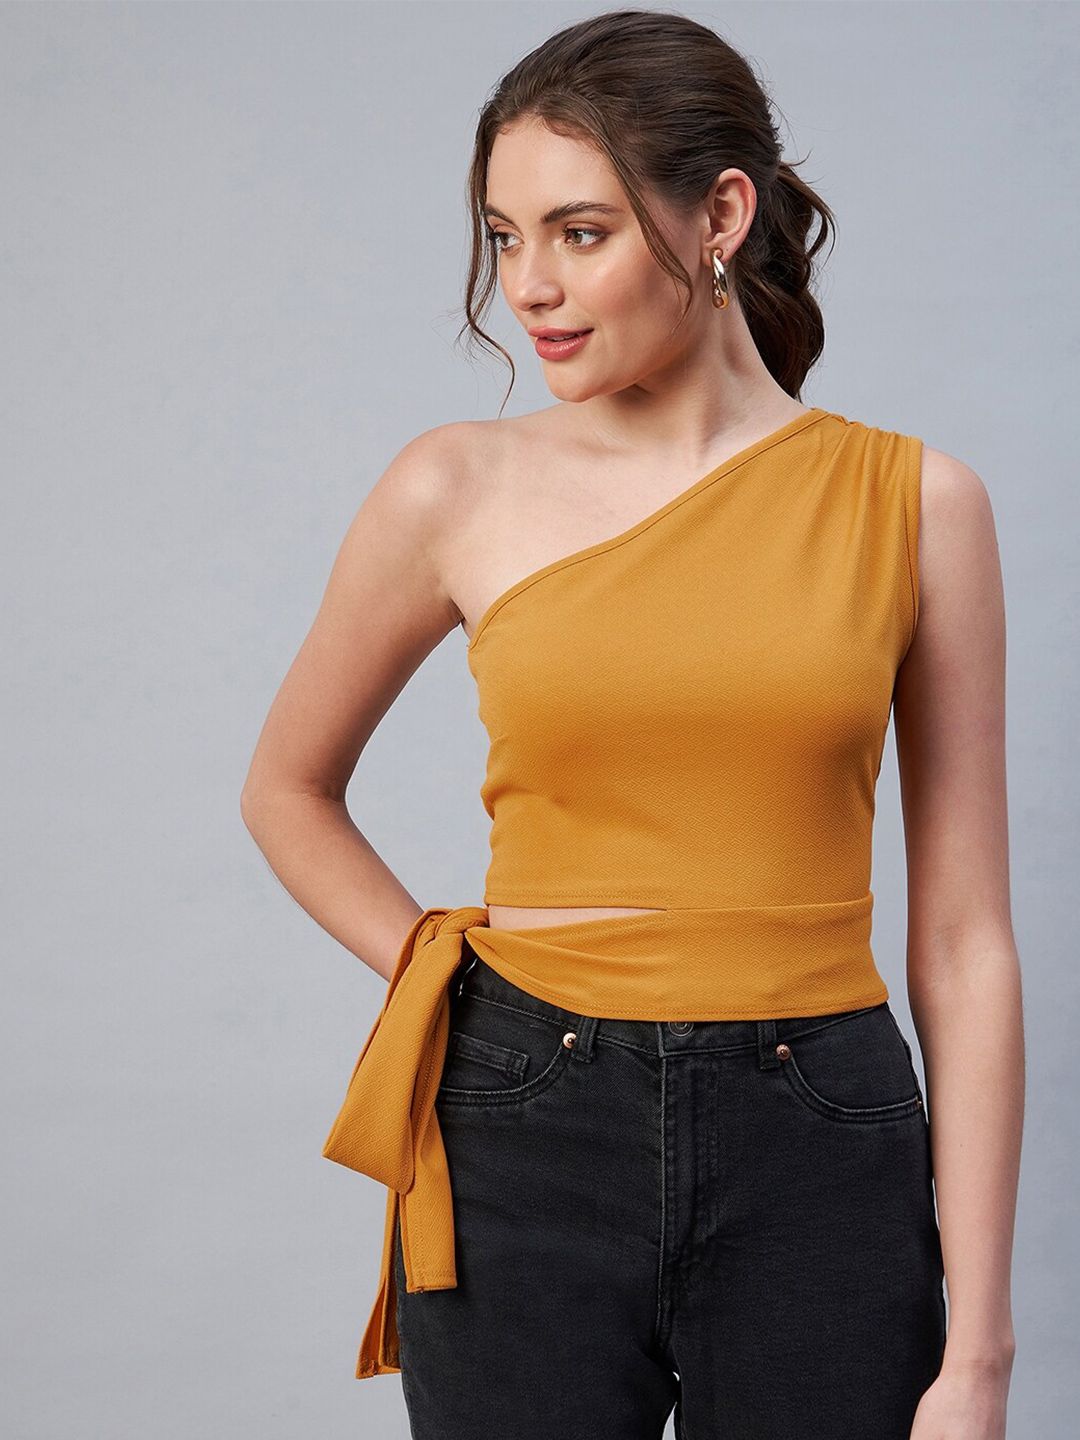 Marie Claire Mustard Yellow One Shoulder Top Price in India